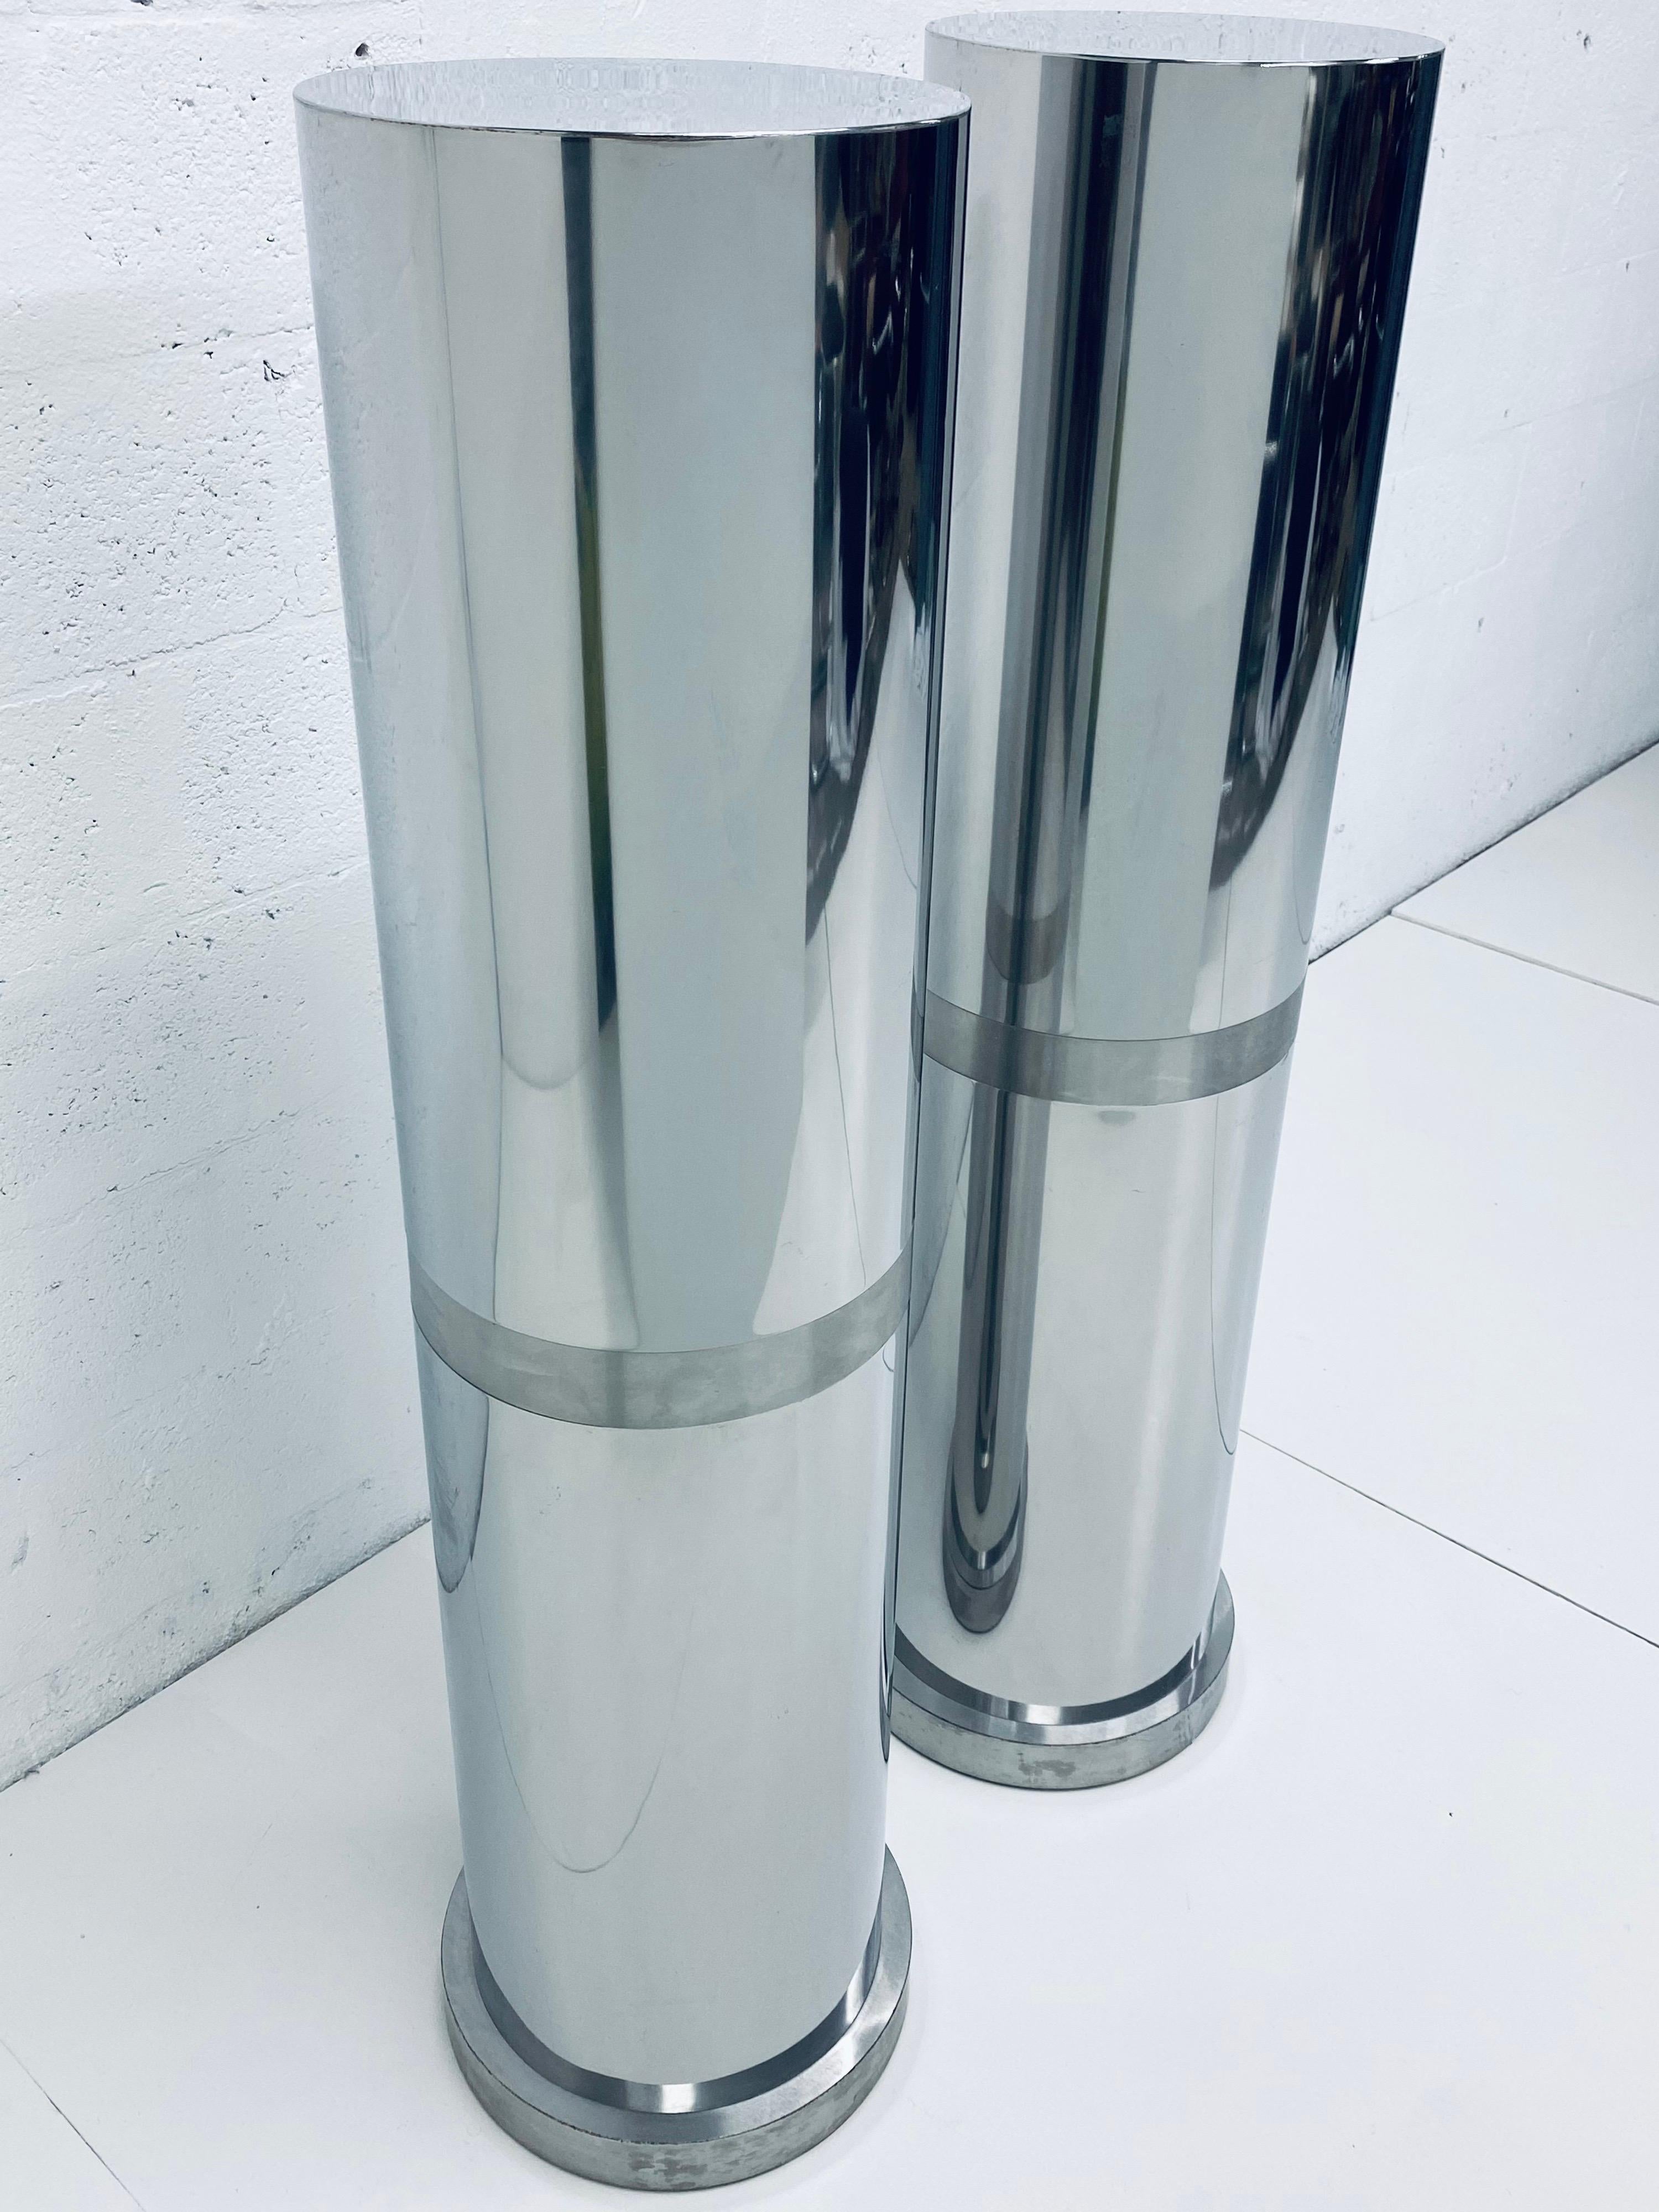 Pair of Polished Steel Tall Circular Pedestal Tables with Brushed Steel Banding In Good Condition For Sale In Miami, FL